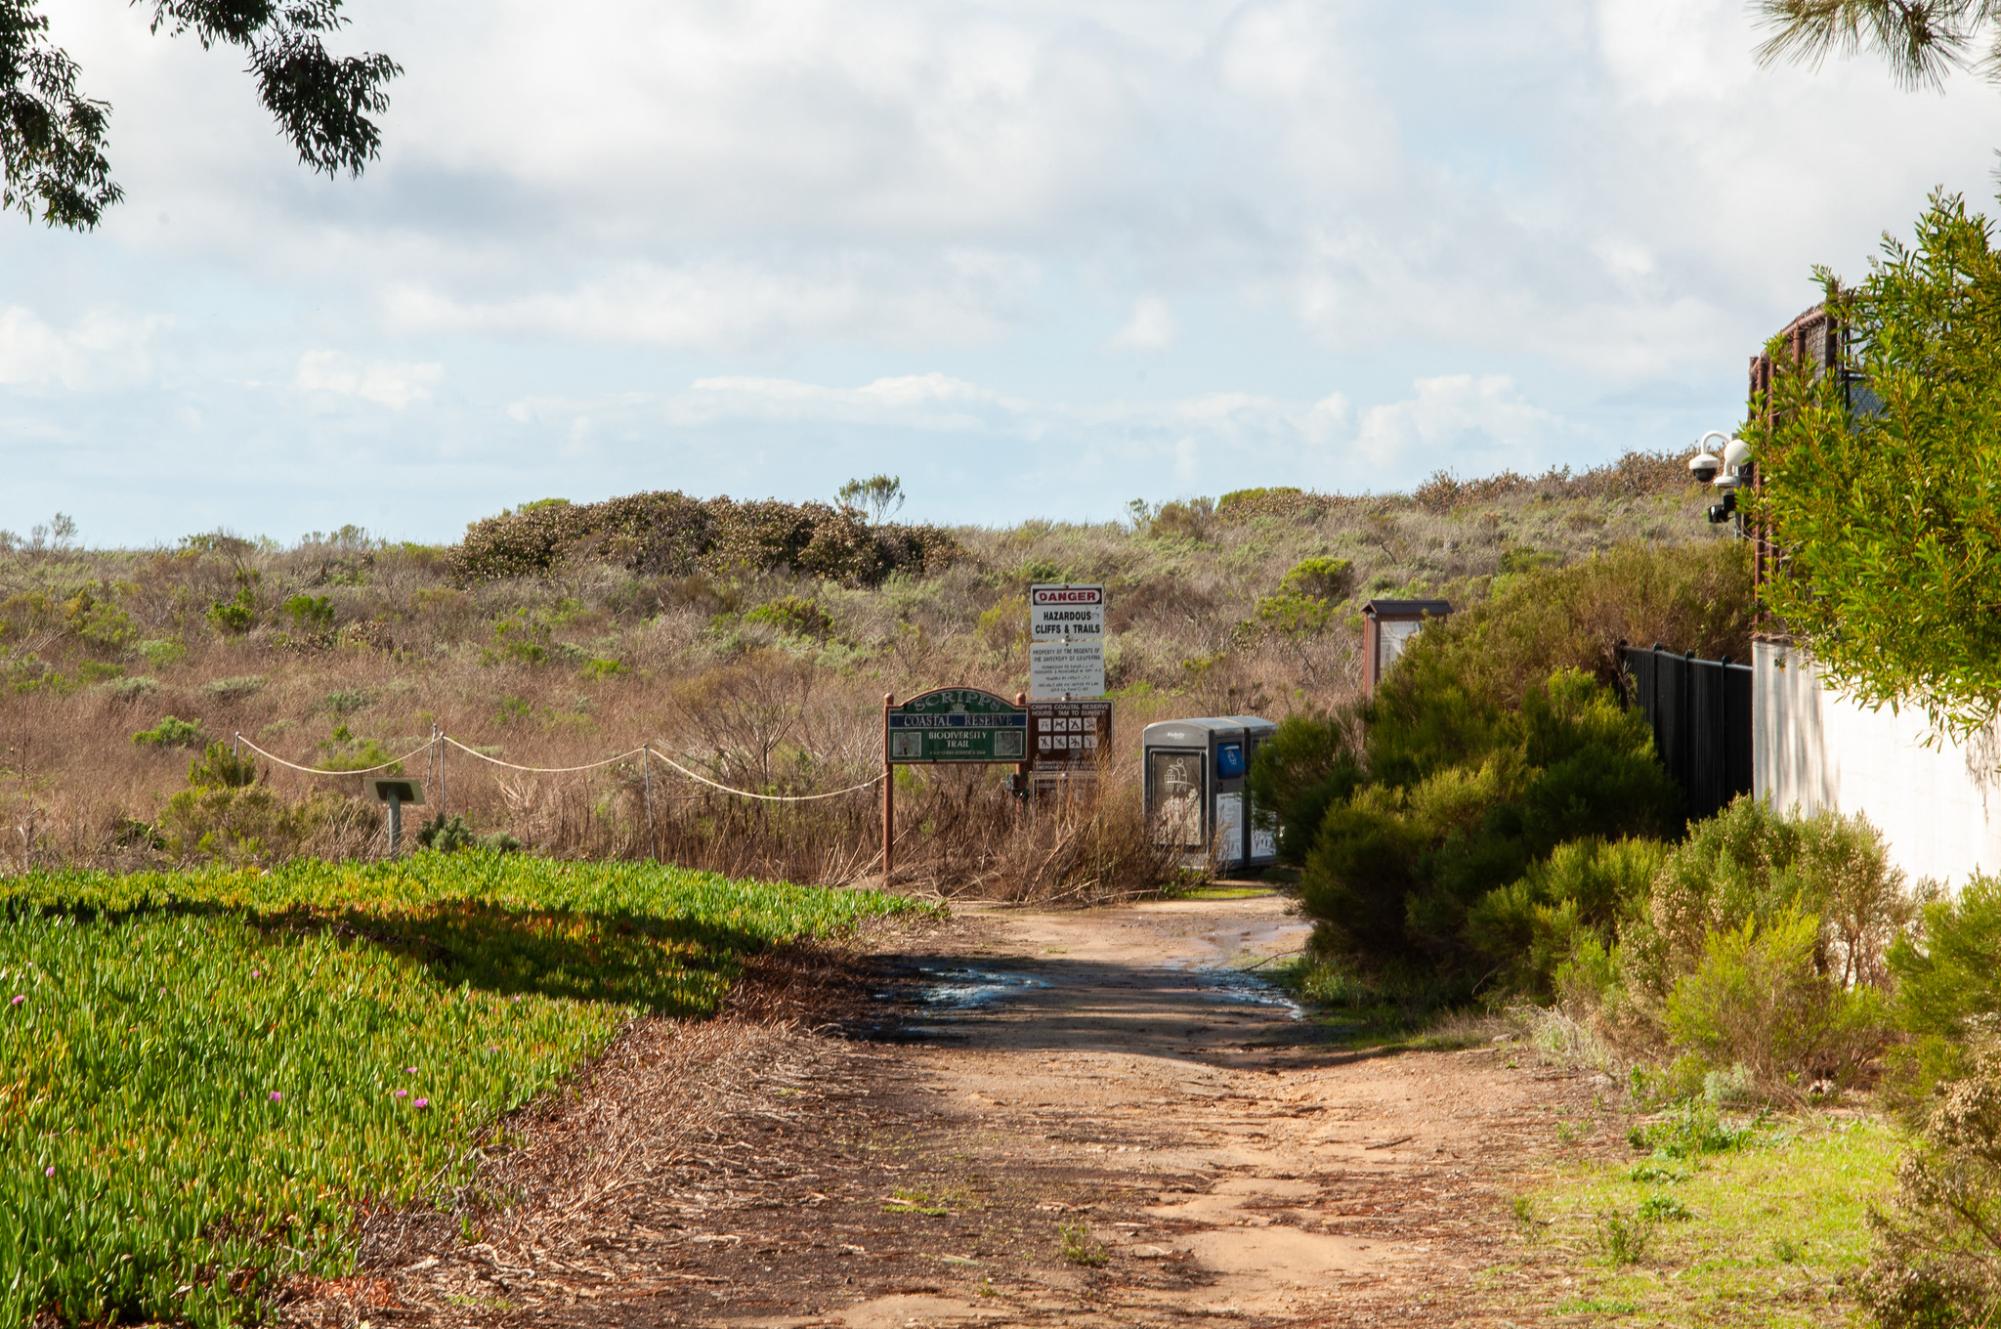 Venturing inside the conservation fortress at the Scripps Coastal Reserve